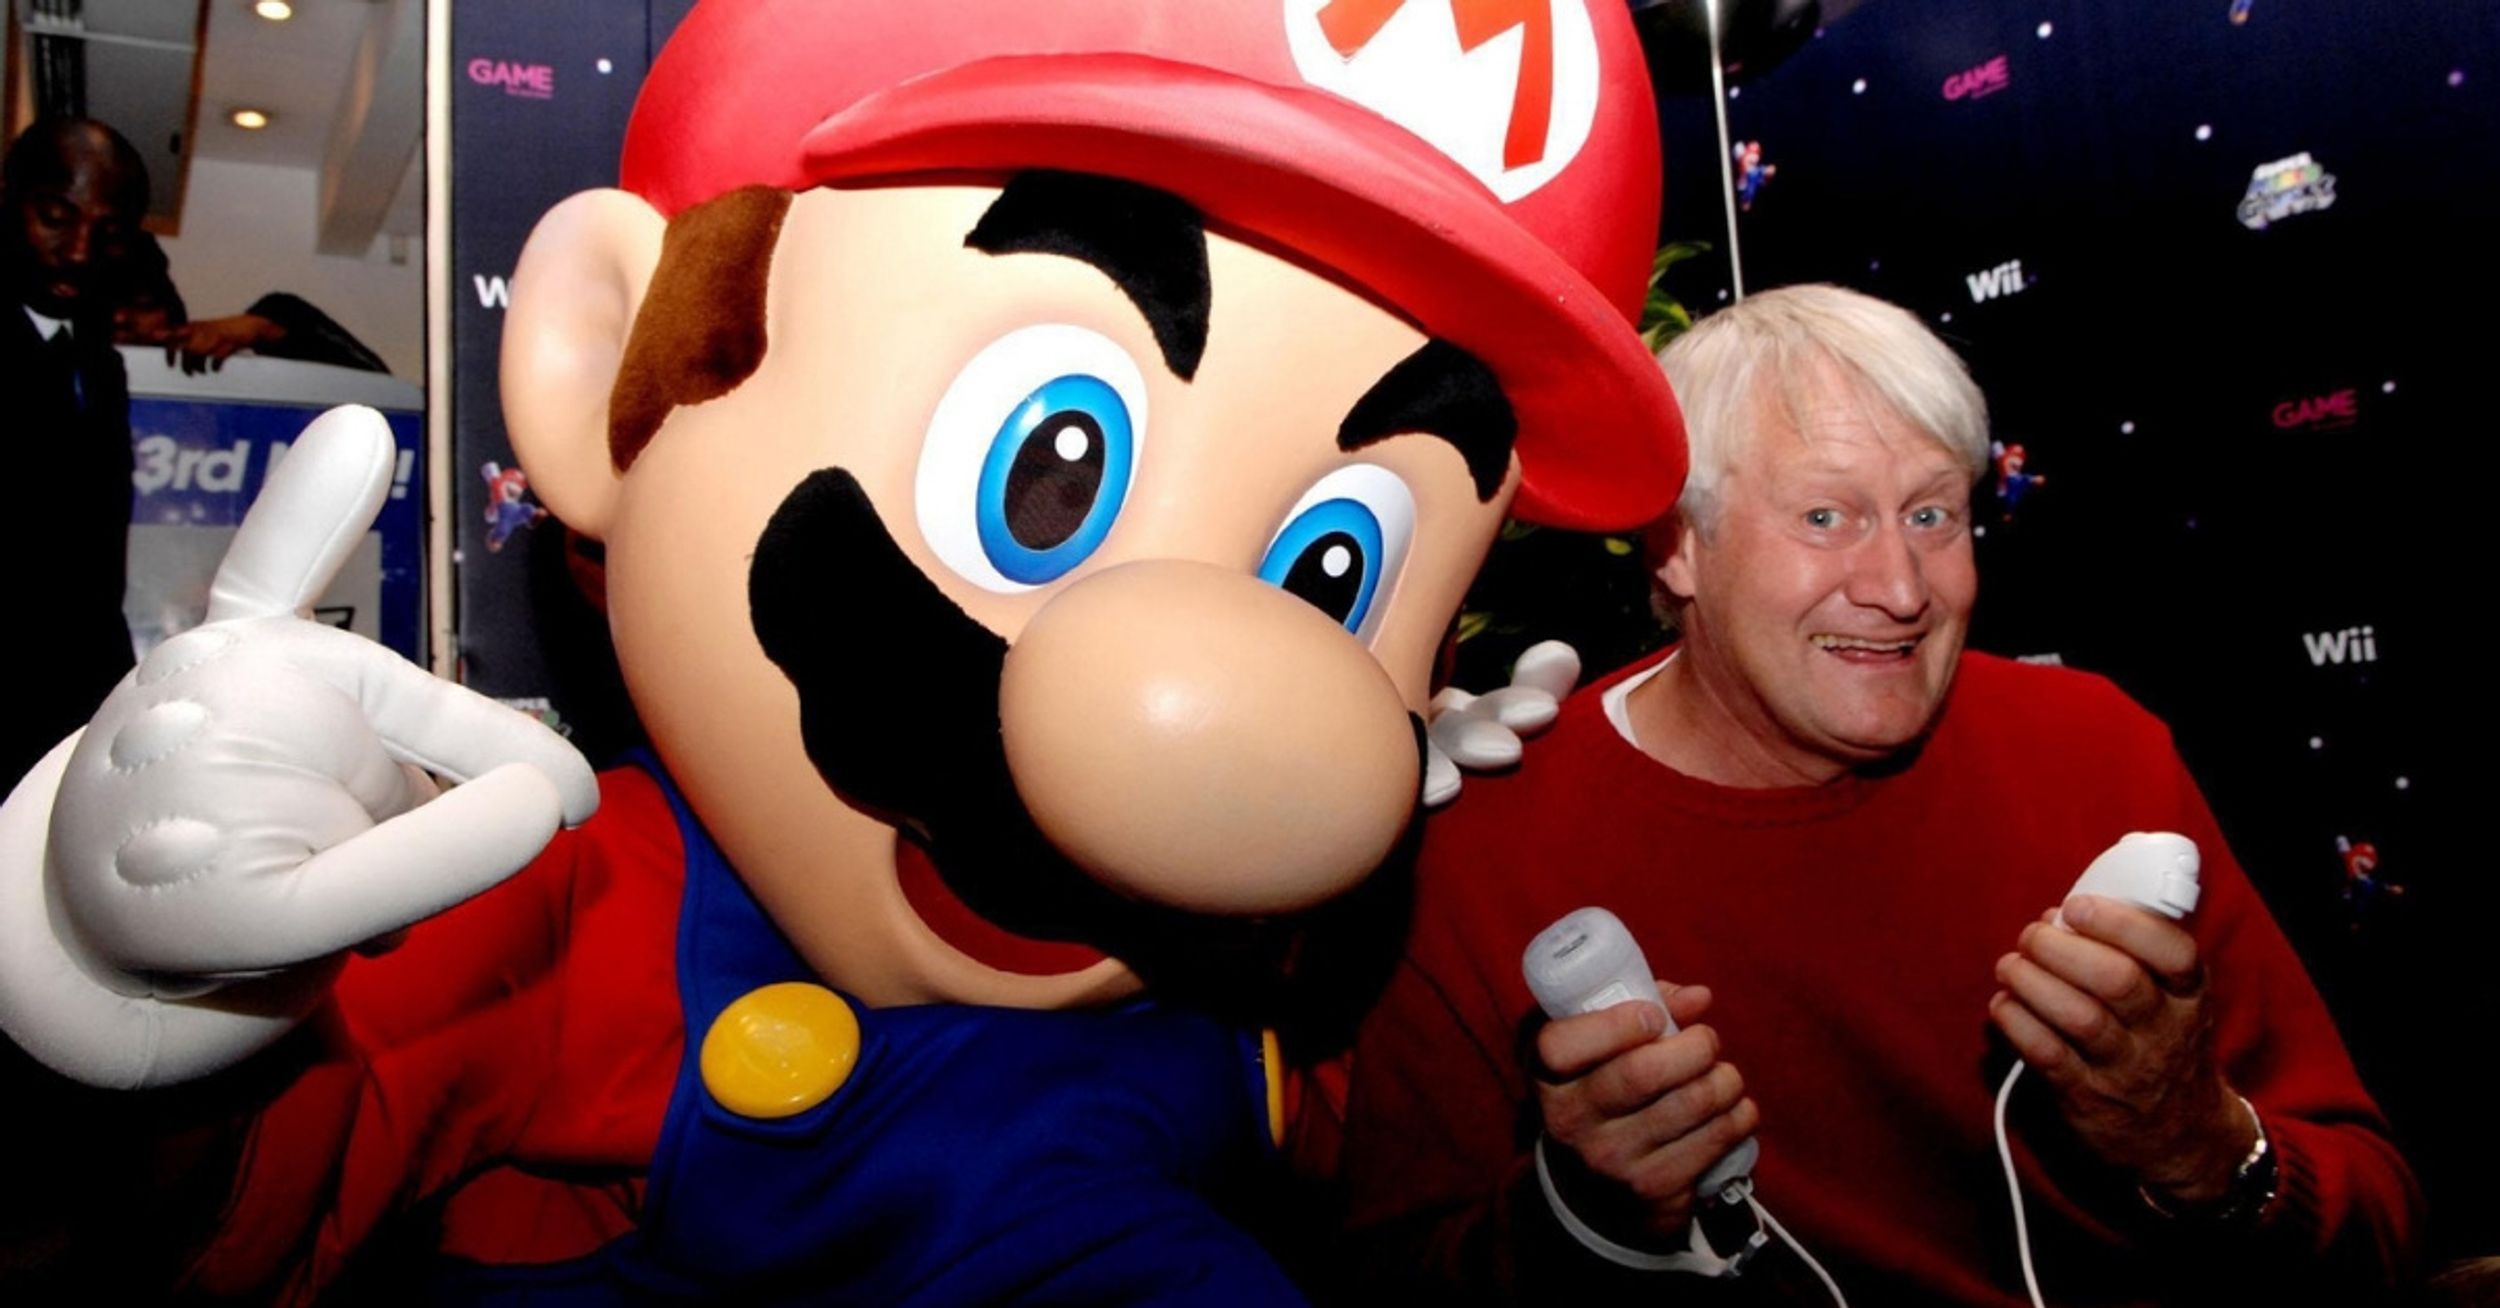 The Actor Who Voices Mario Has Achieved An Impressive Guinness World Record 😮